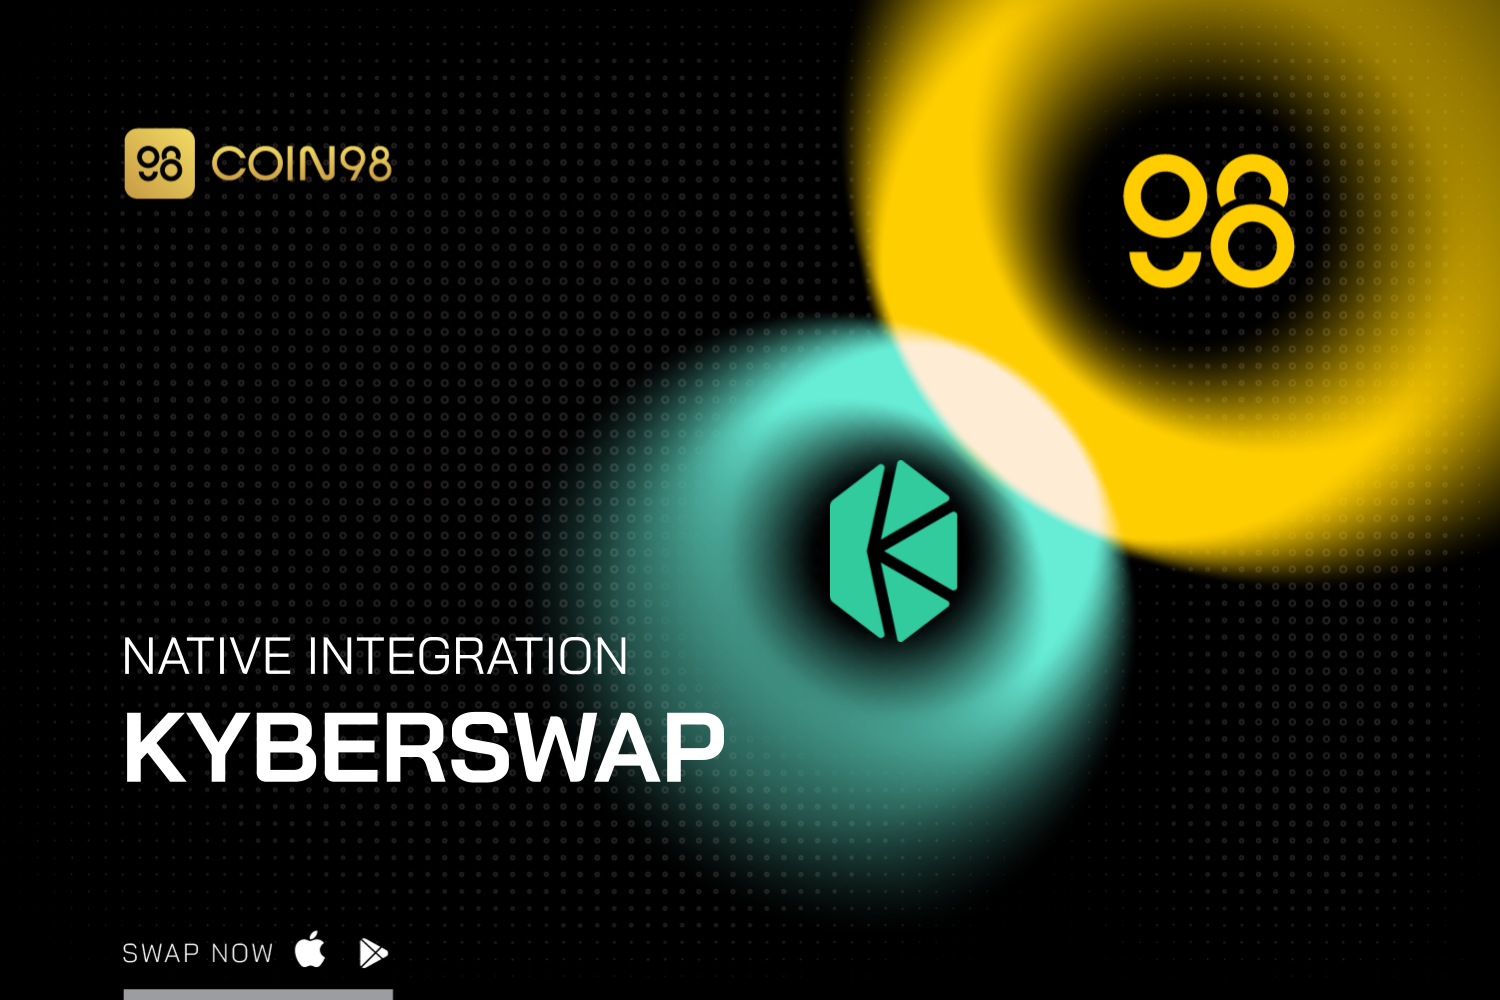 Coin98 integrates KyberSwap natively